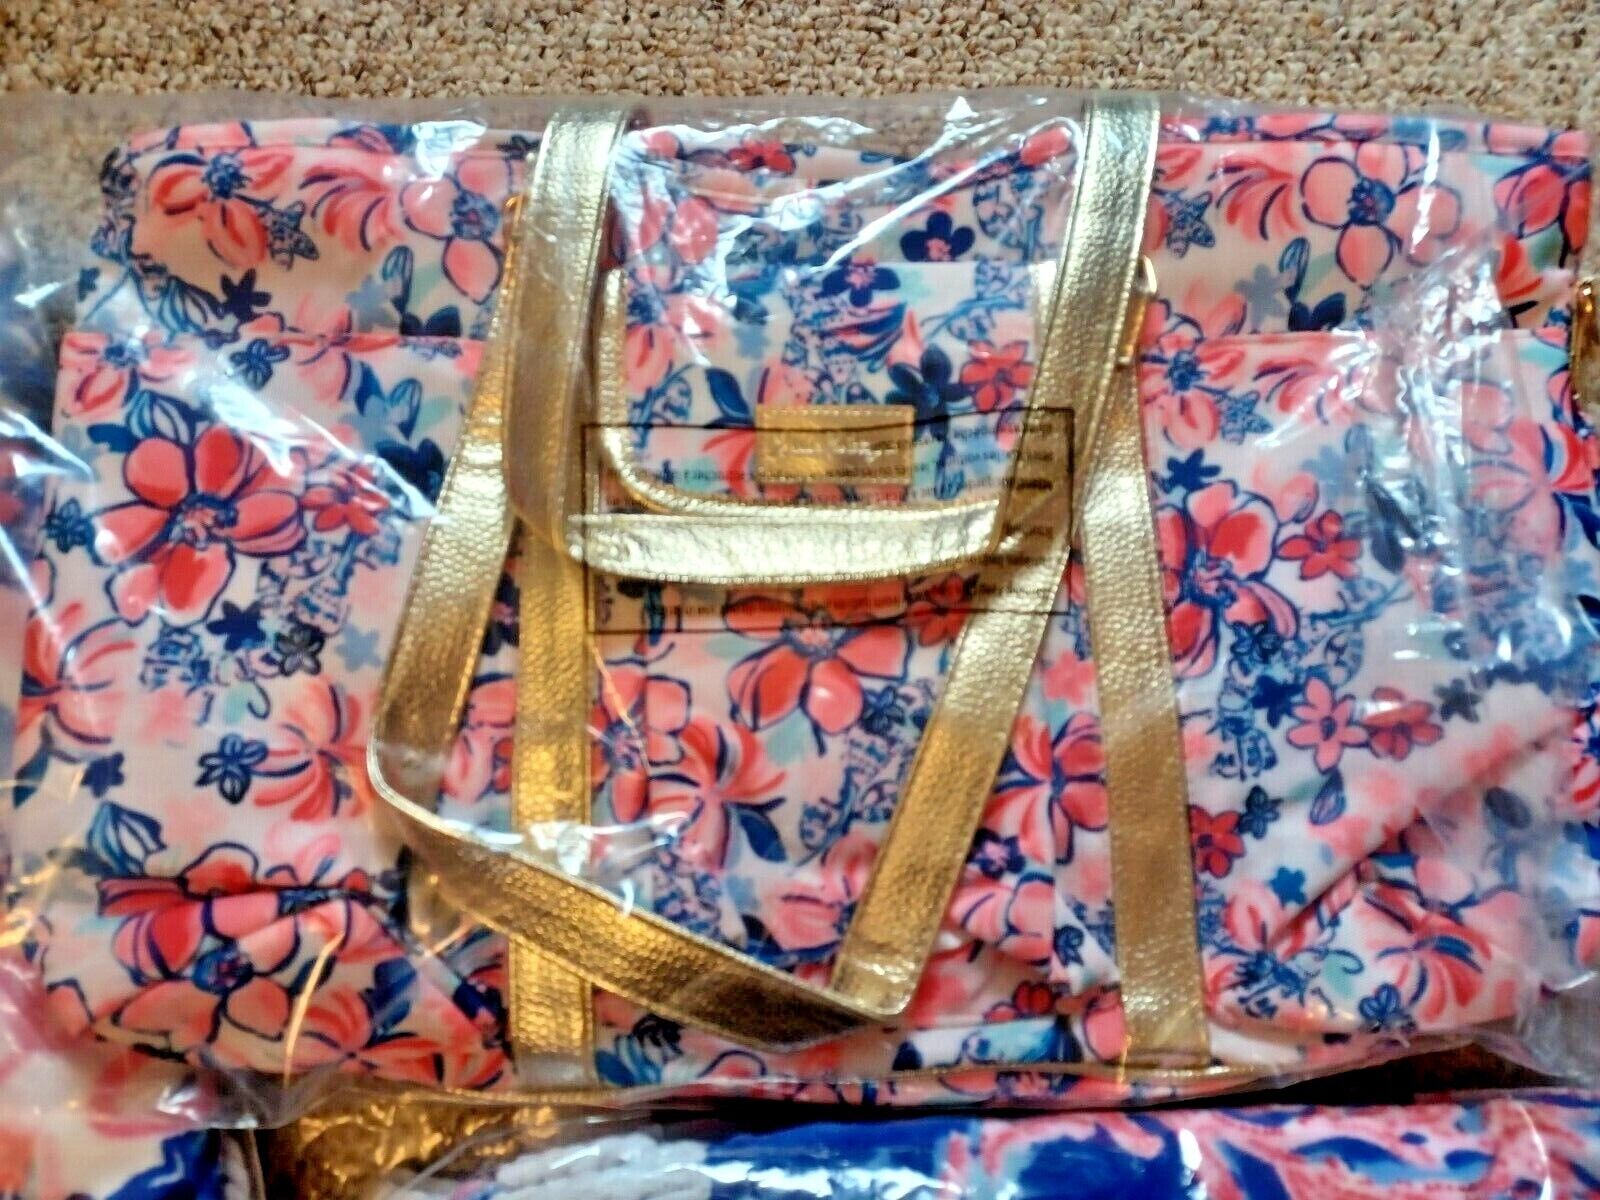 NWT SET LILLY PULITZER INSULATED TOTE BAG,2 BEACH TOWELS,1 COSMETIC POUCH PURSE  Lilly Pulitzer - фотография #9